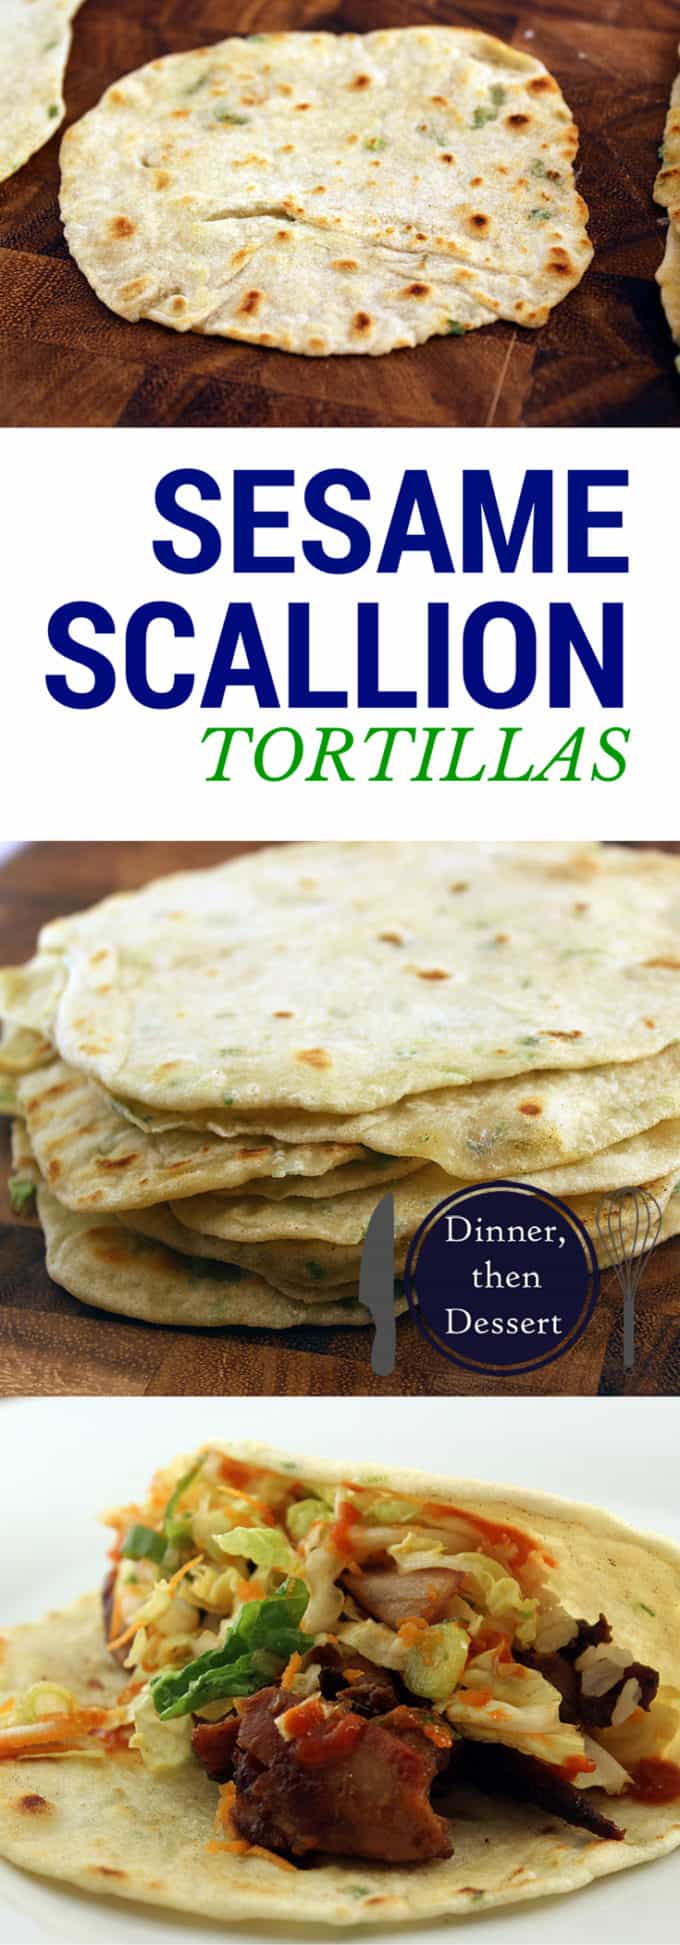 These Sesame Scallion Tortillas are easy to make and add a whole different layer of flavor to your dishes!